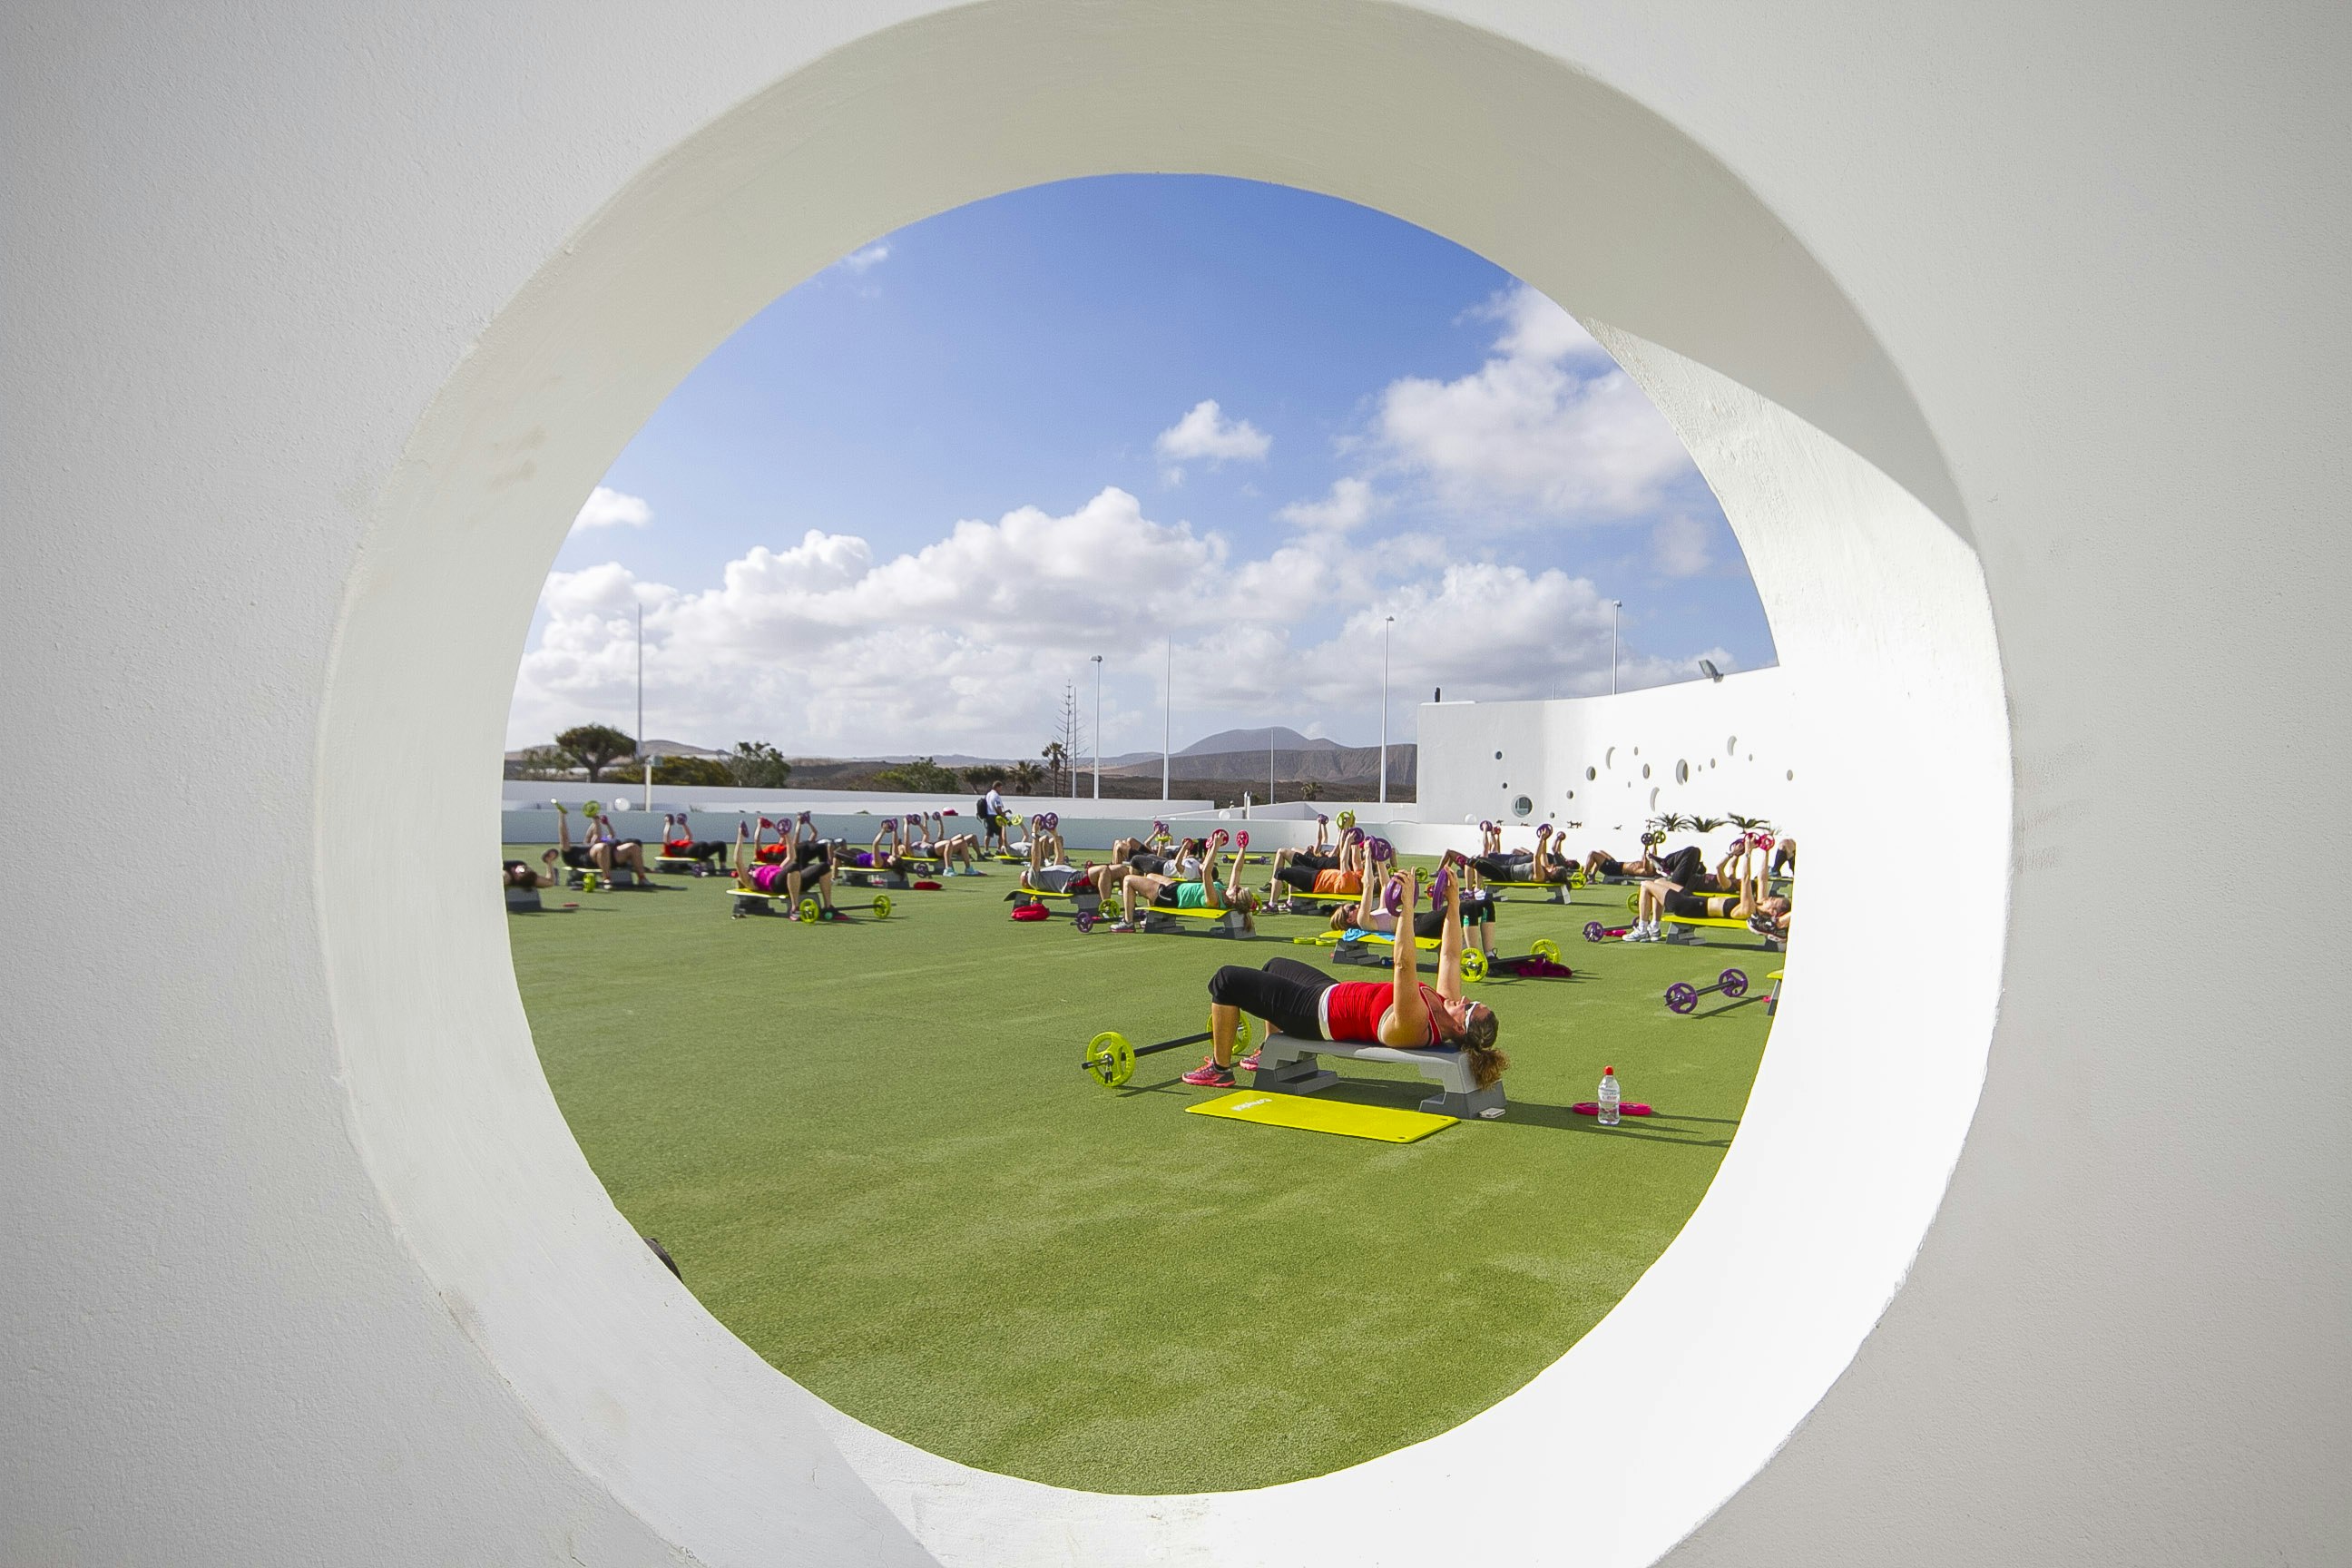 Looking through a circular hole in a pristine white wall, a group of people lay on small benches while performing chest exercises; at their feet are barbells sitting on the artificial grass.